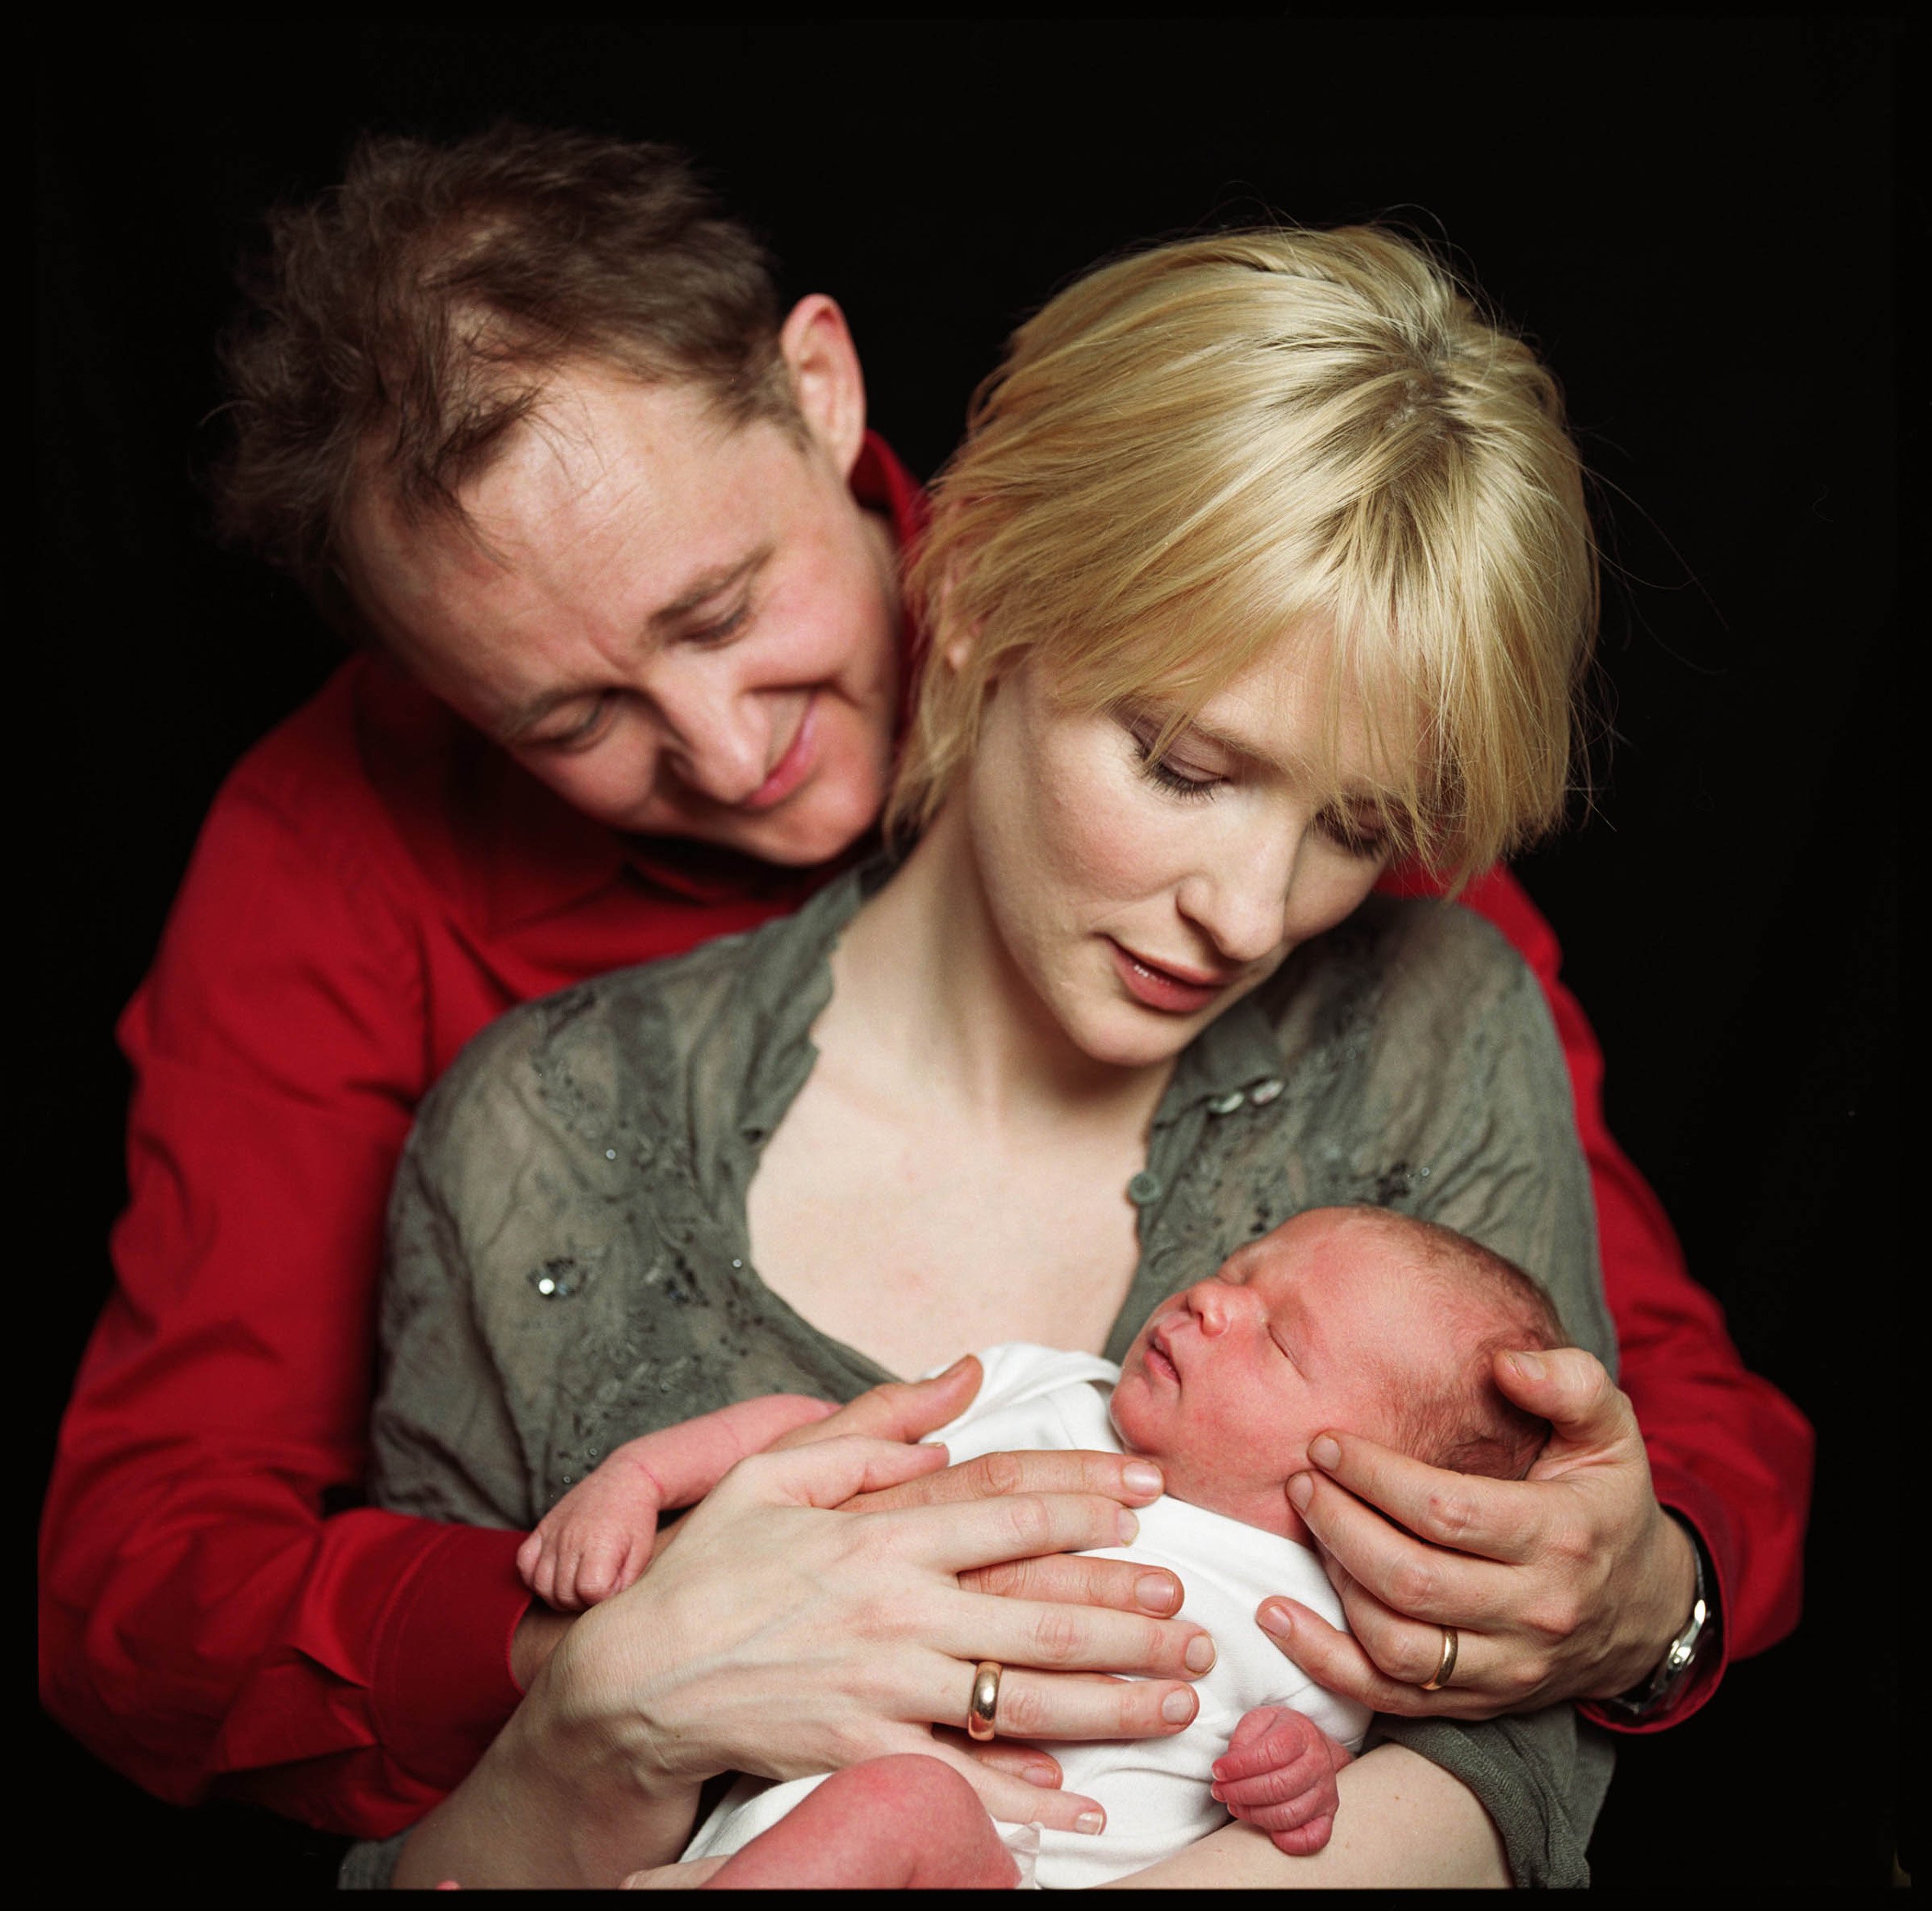 Cate Blanchett and. Andrew Upton smile with their first child, Dashiell John, the week of December 3, 2001, in London, England. | Source: Getty Images